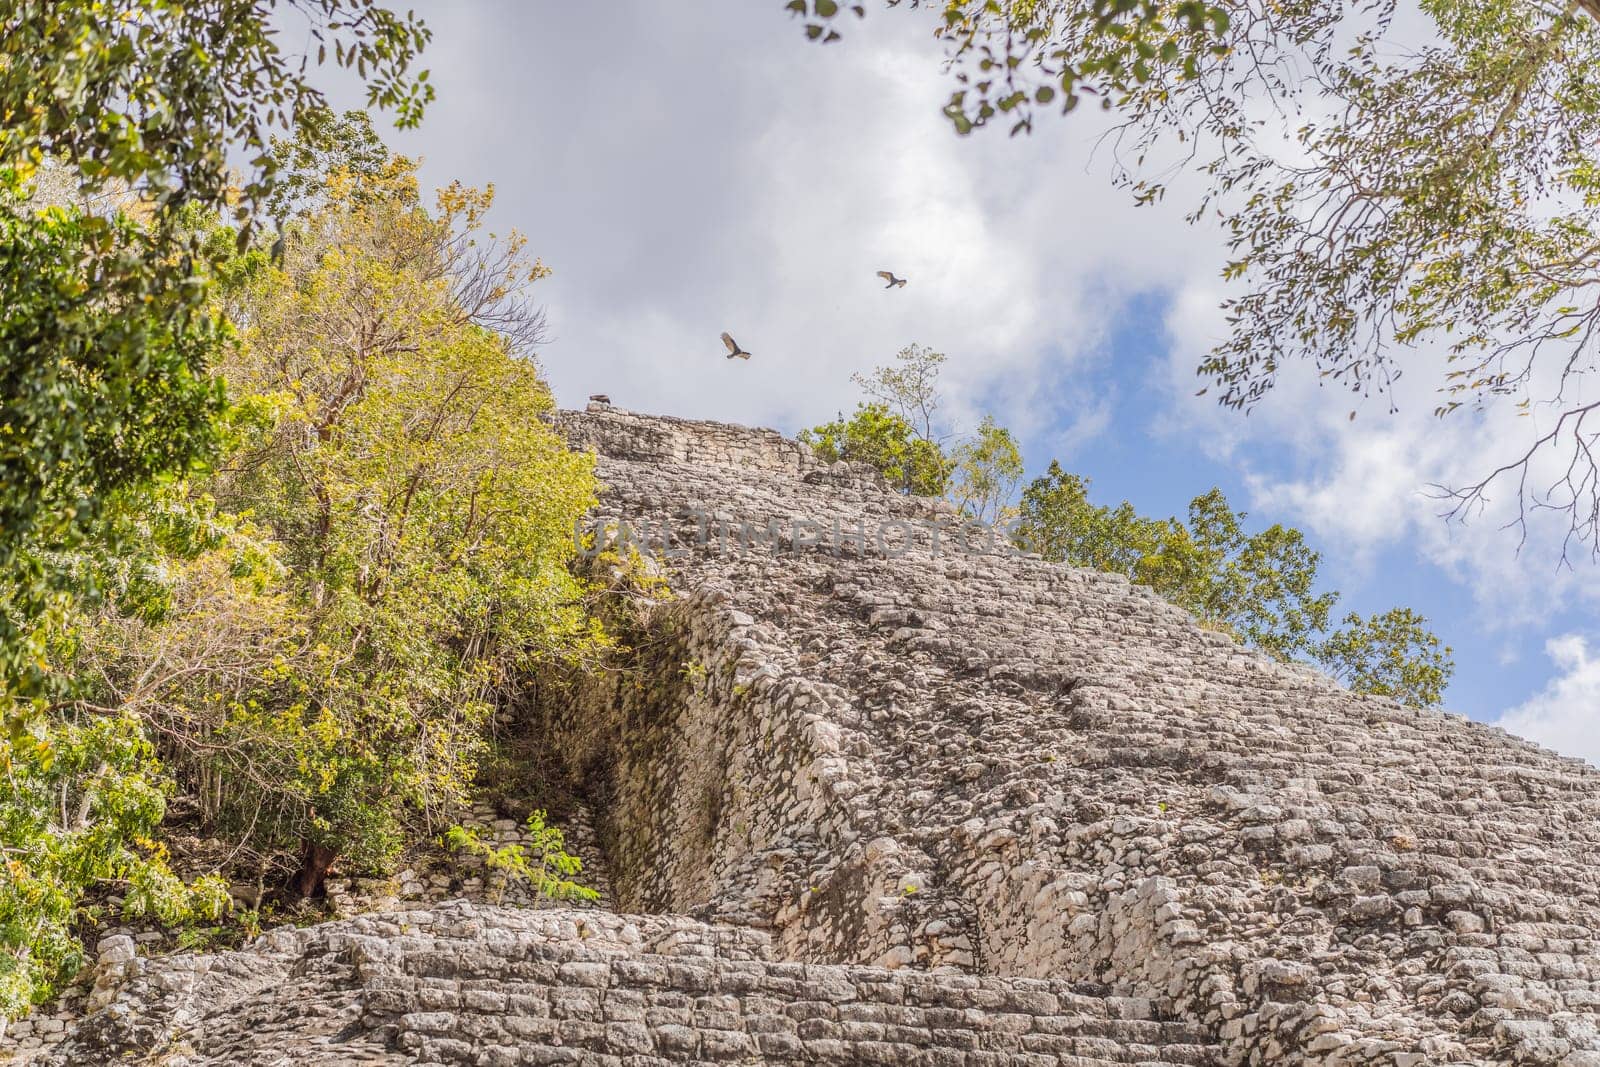 Coba, Mexico. Ancient mayan city in Mexico. Coba is an archaeological area and a famous landmark of Yucatan Peninsula. Cloudy sky over a pyramid in Mexico by galitskaya